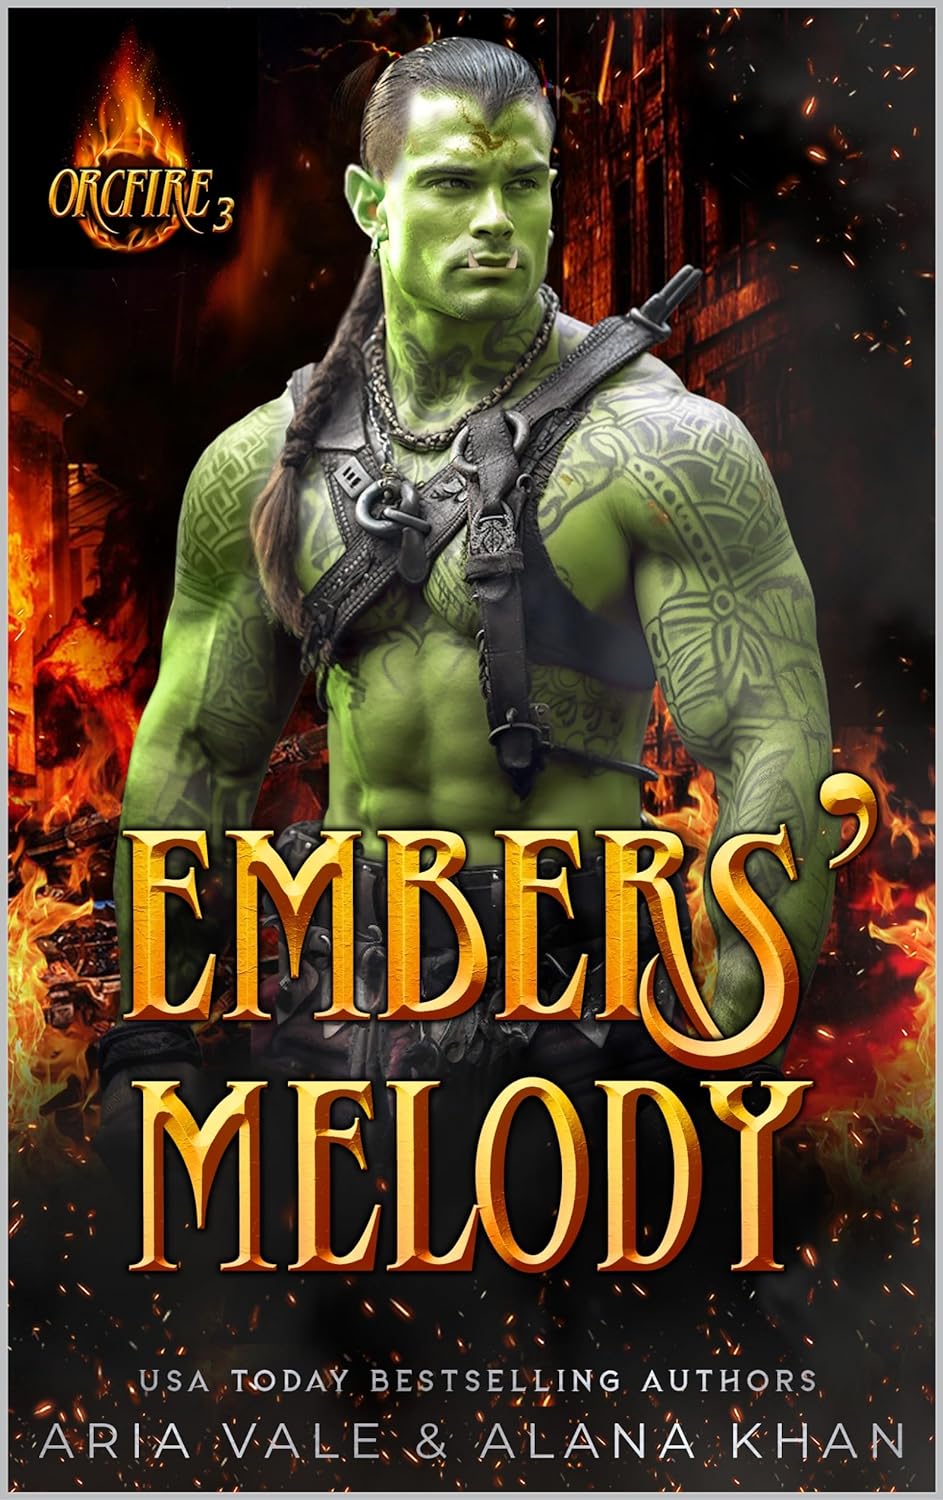 Embers’ Melody by Aria Vale & Alana Khan